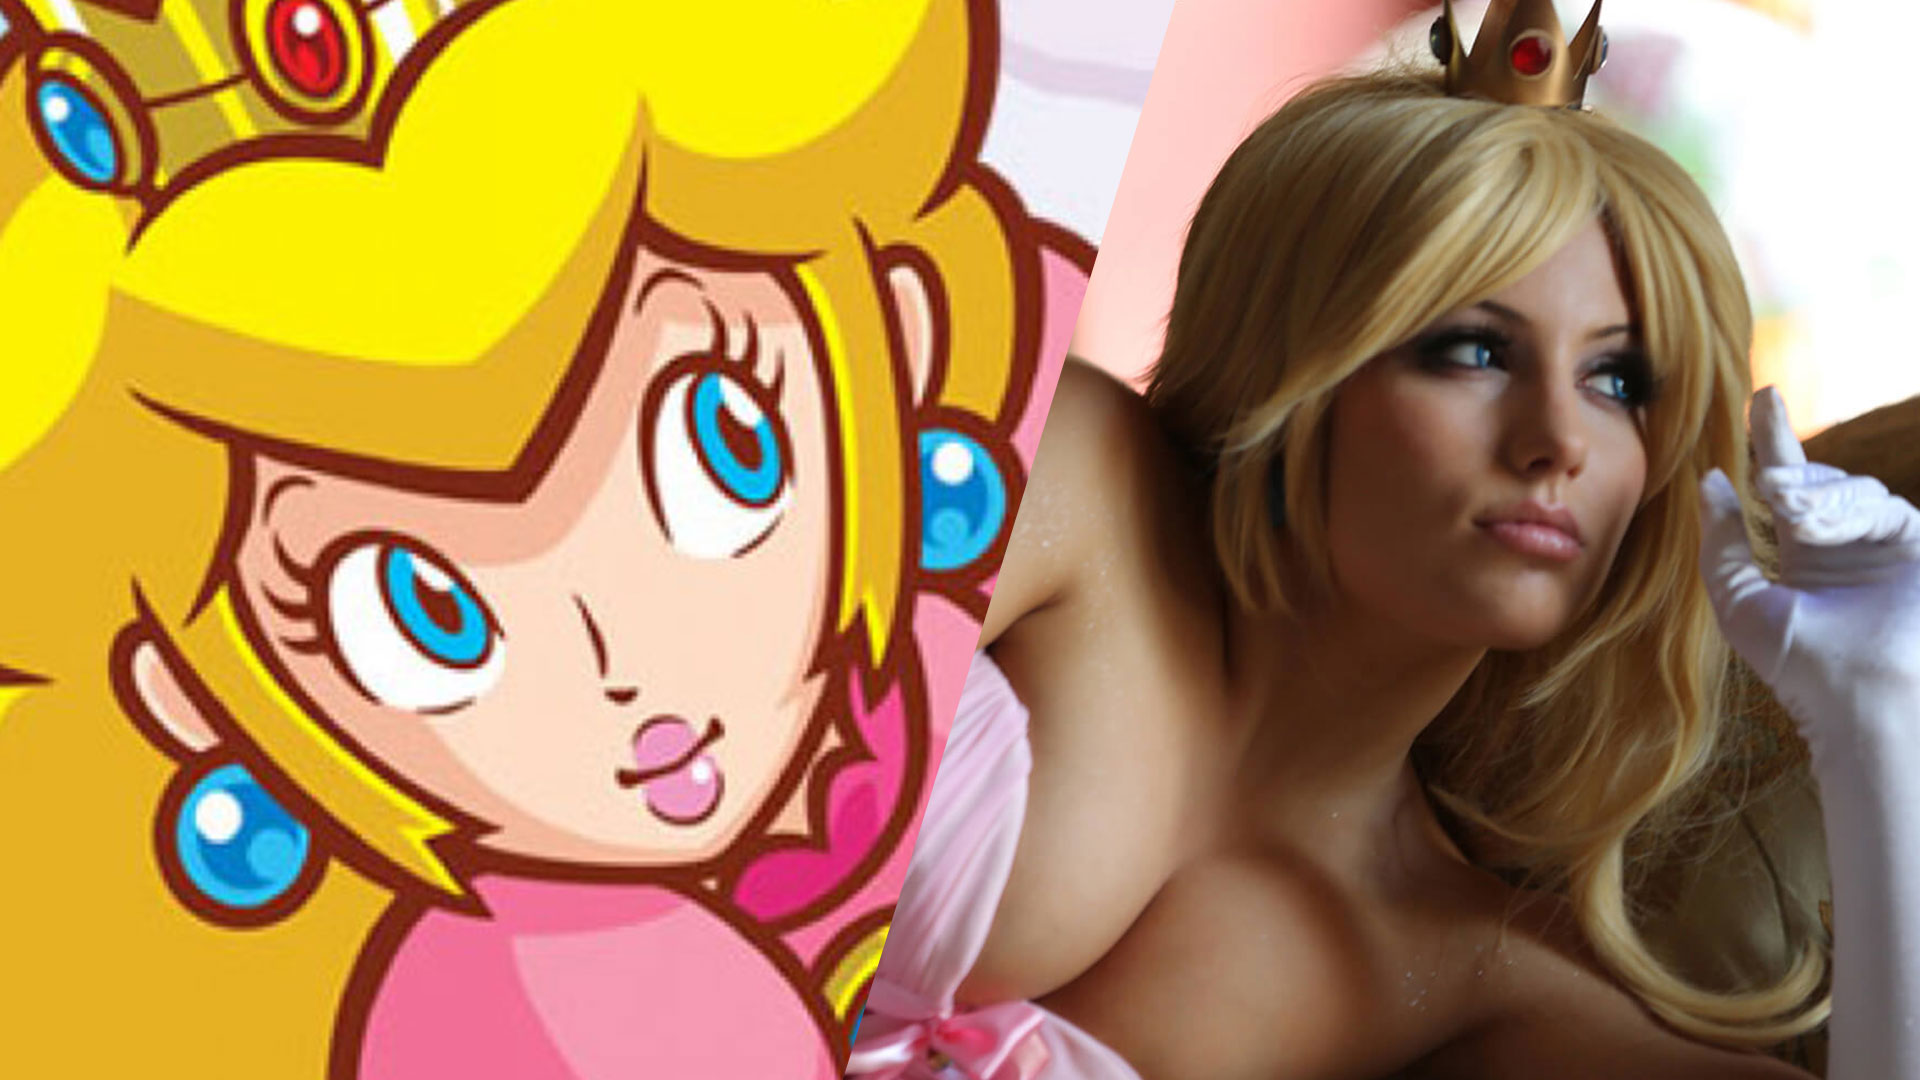 Explore the dark side of princess peach with these rule 34 pictures